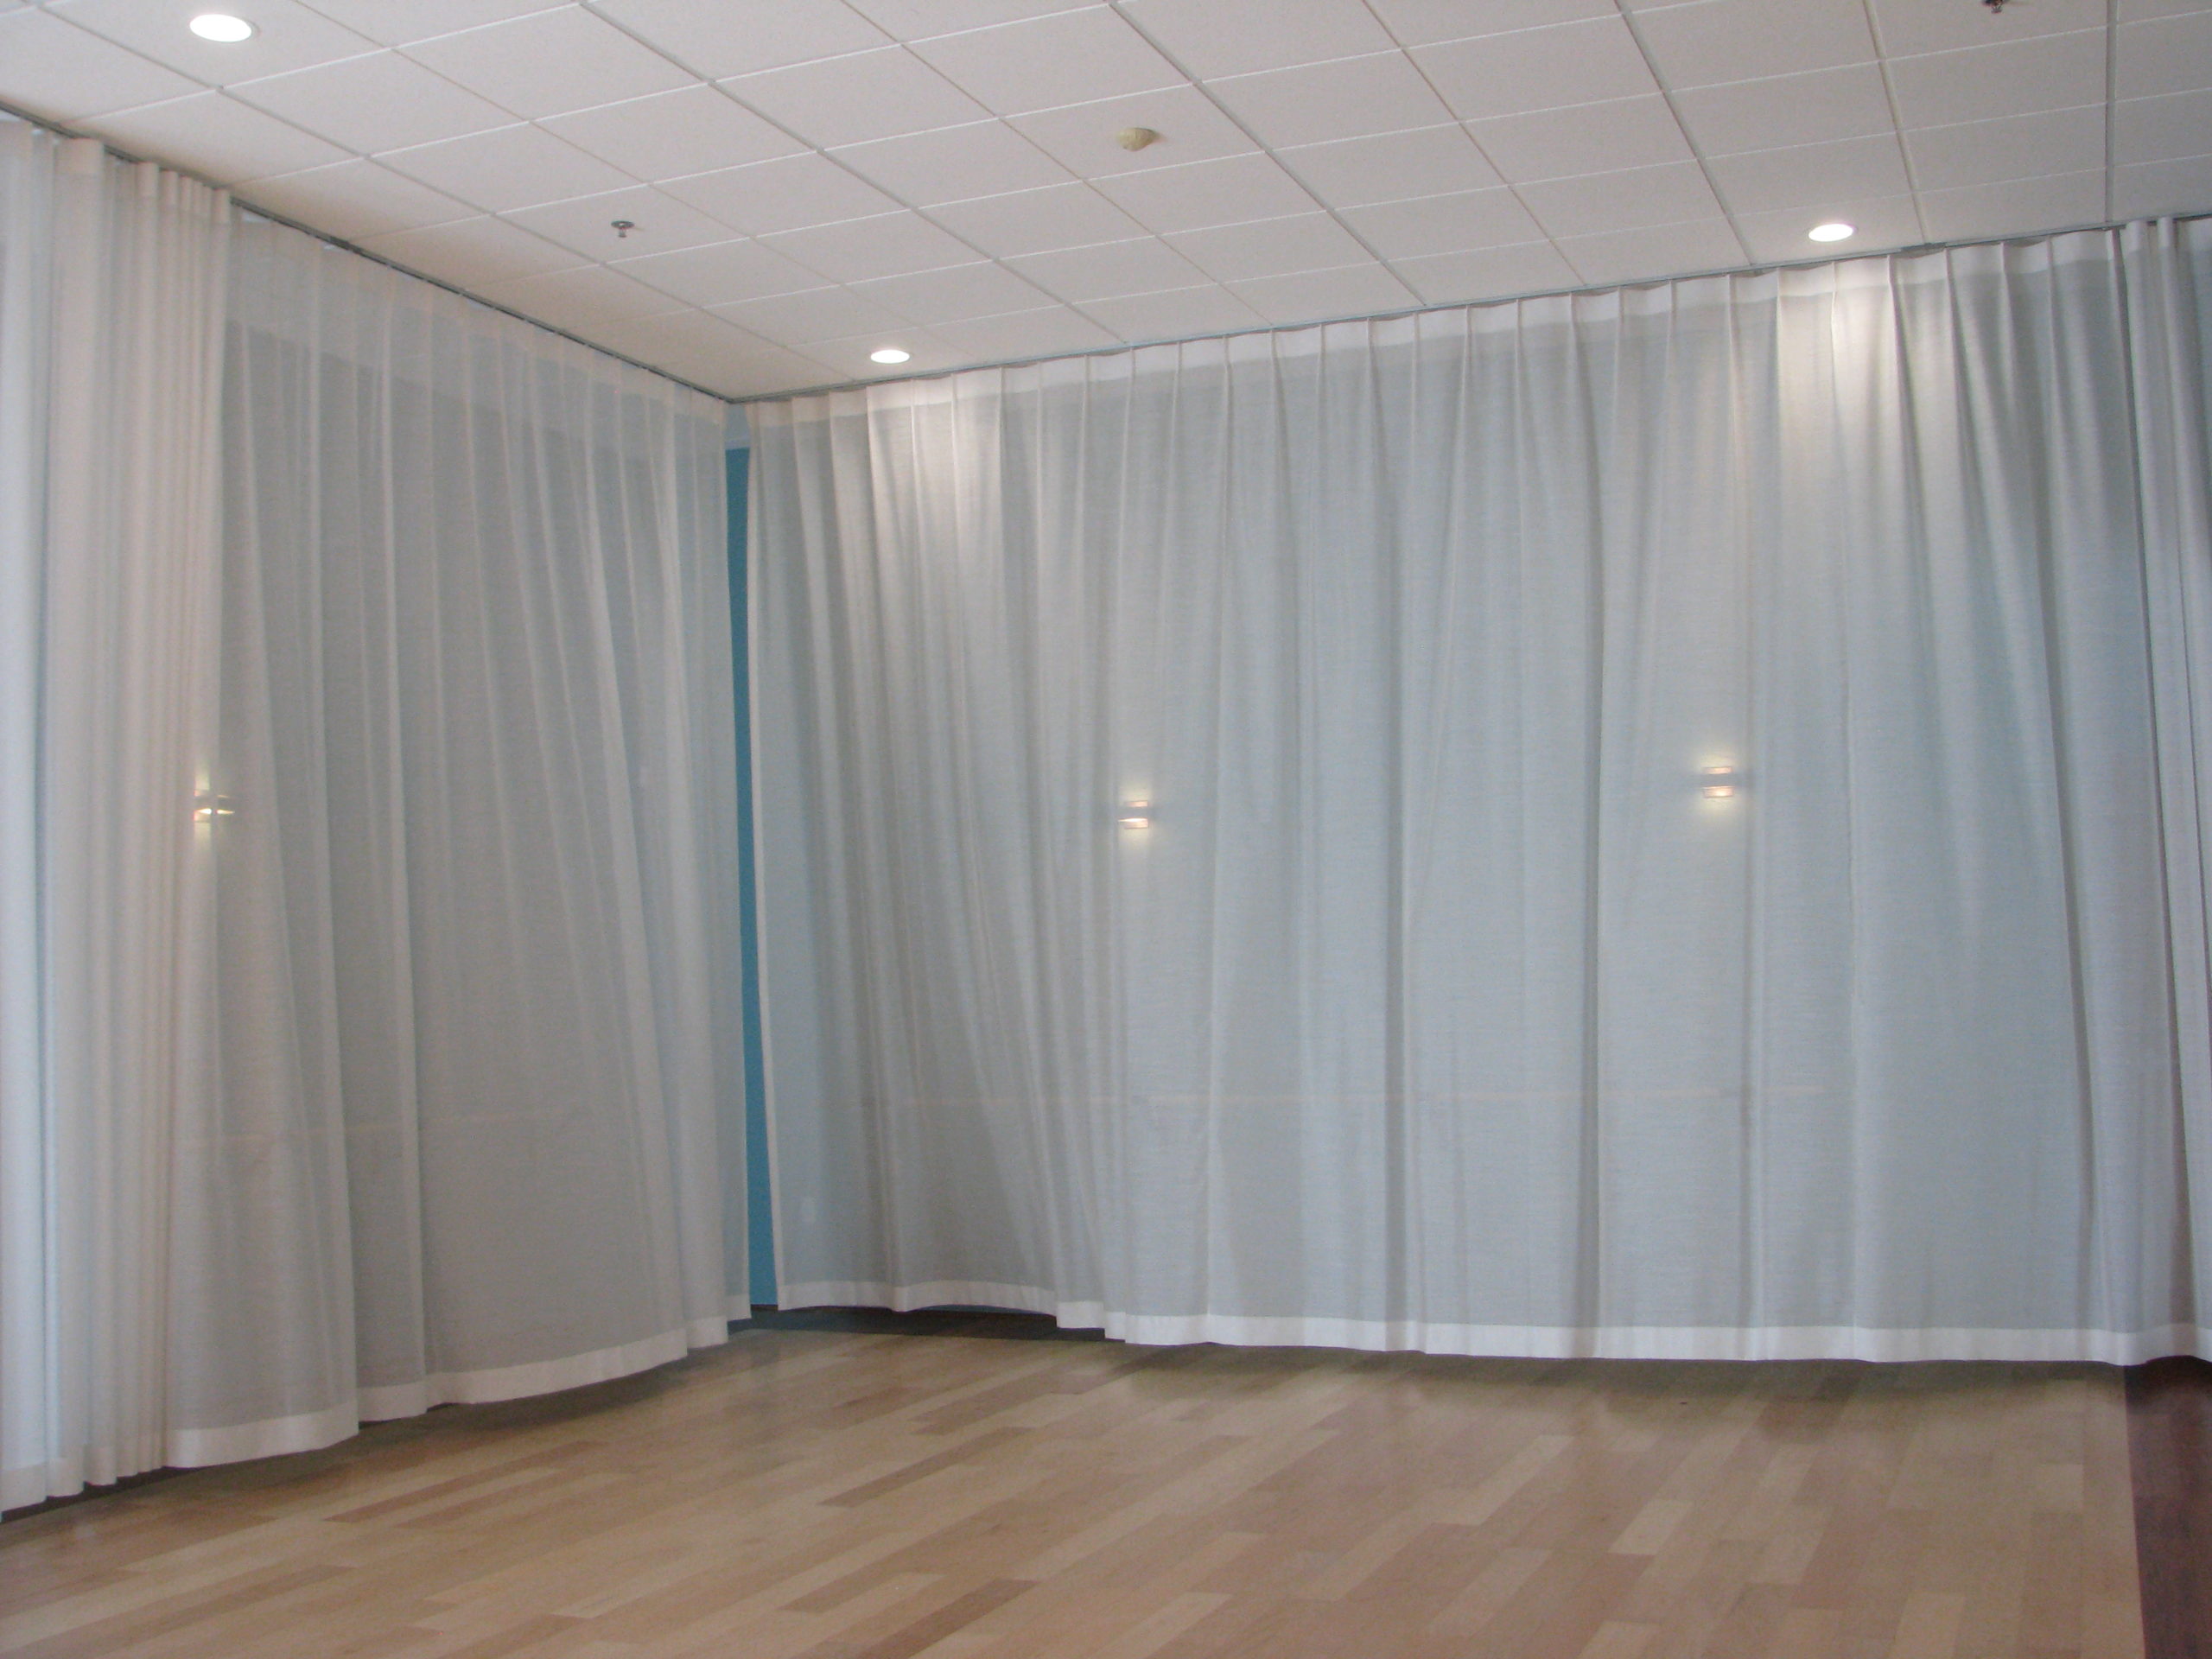 A welcoming business with commercial fabric designs